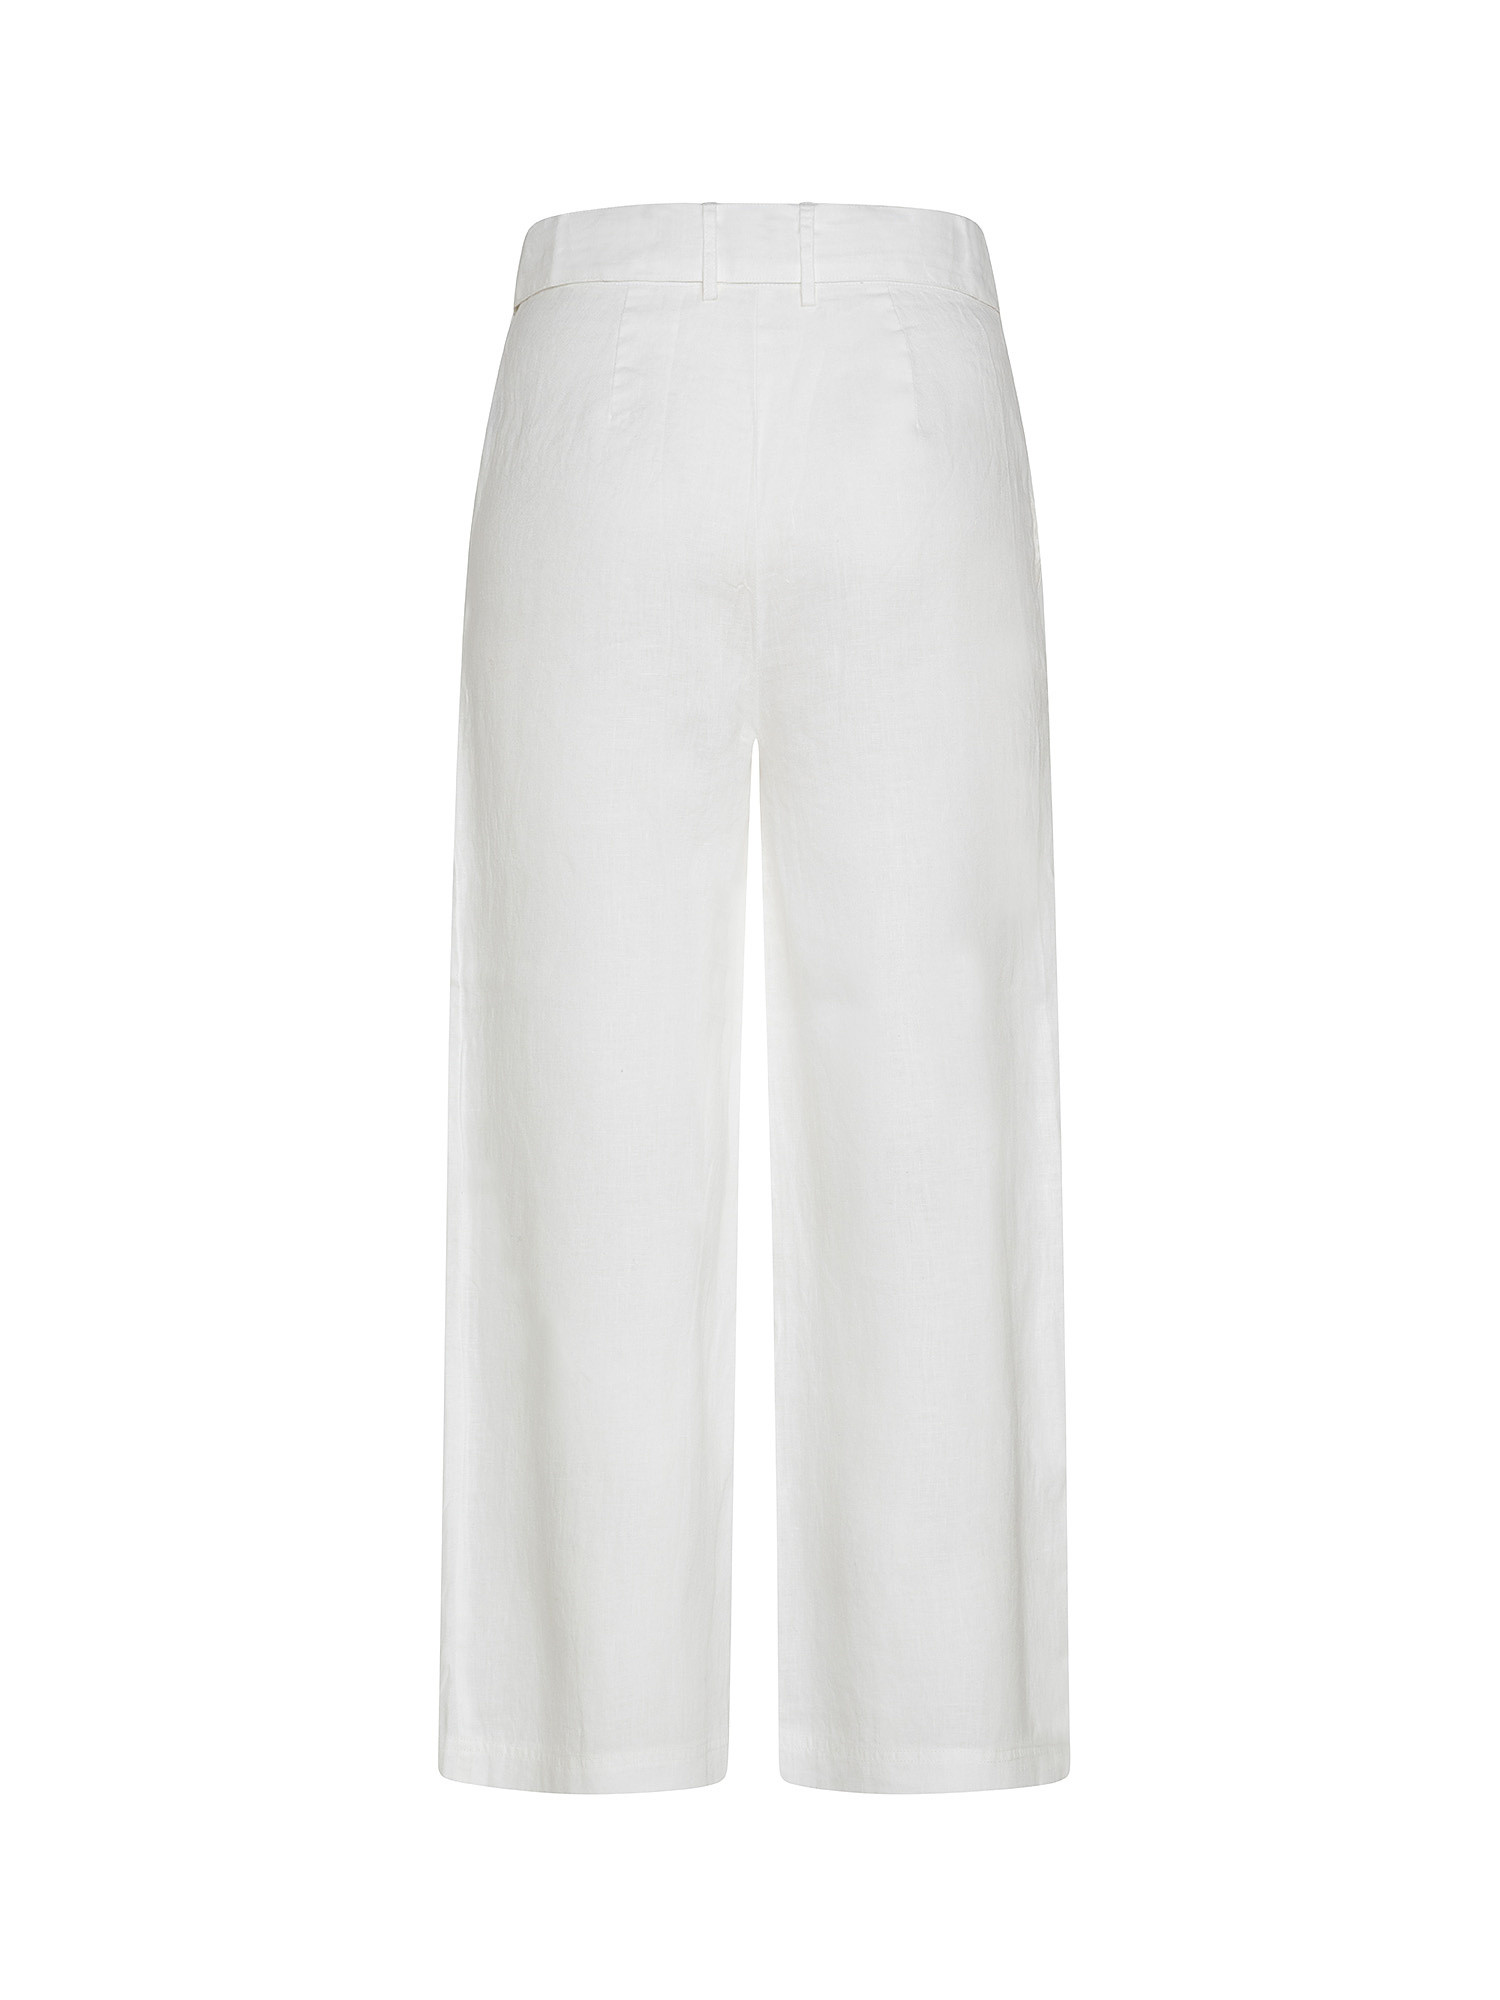 Pure linen 3/4 trousers with belt, White, large image number 1